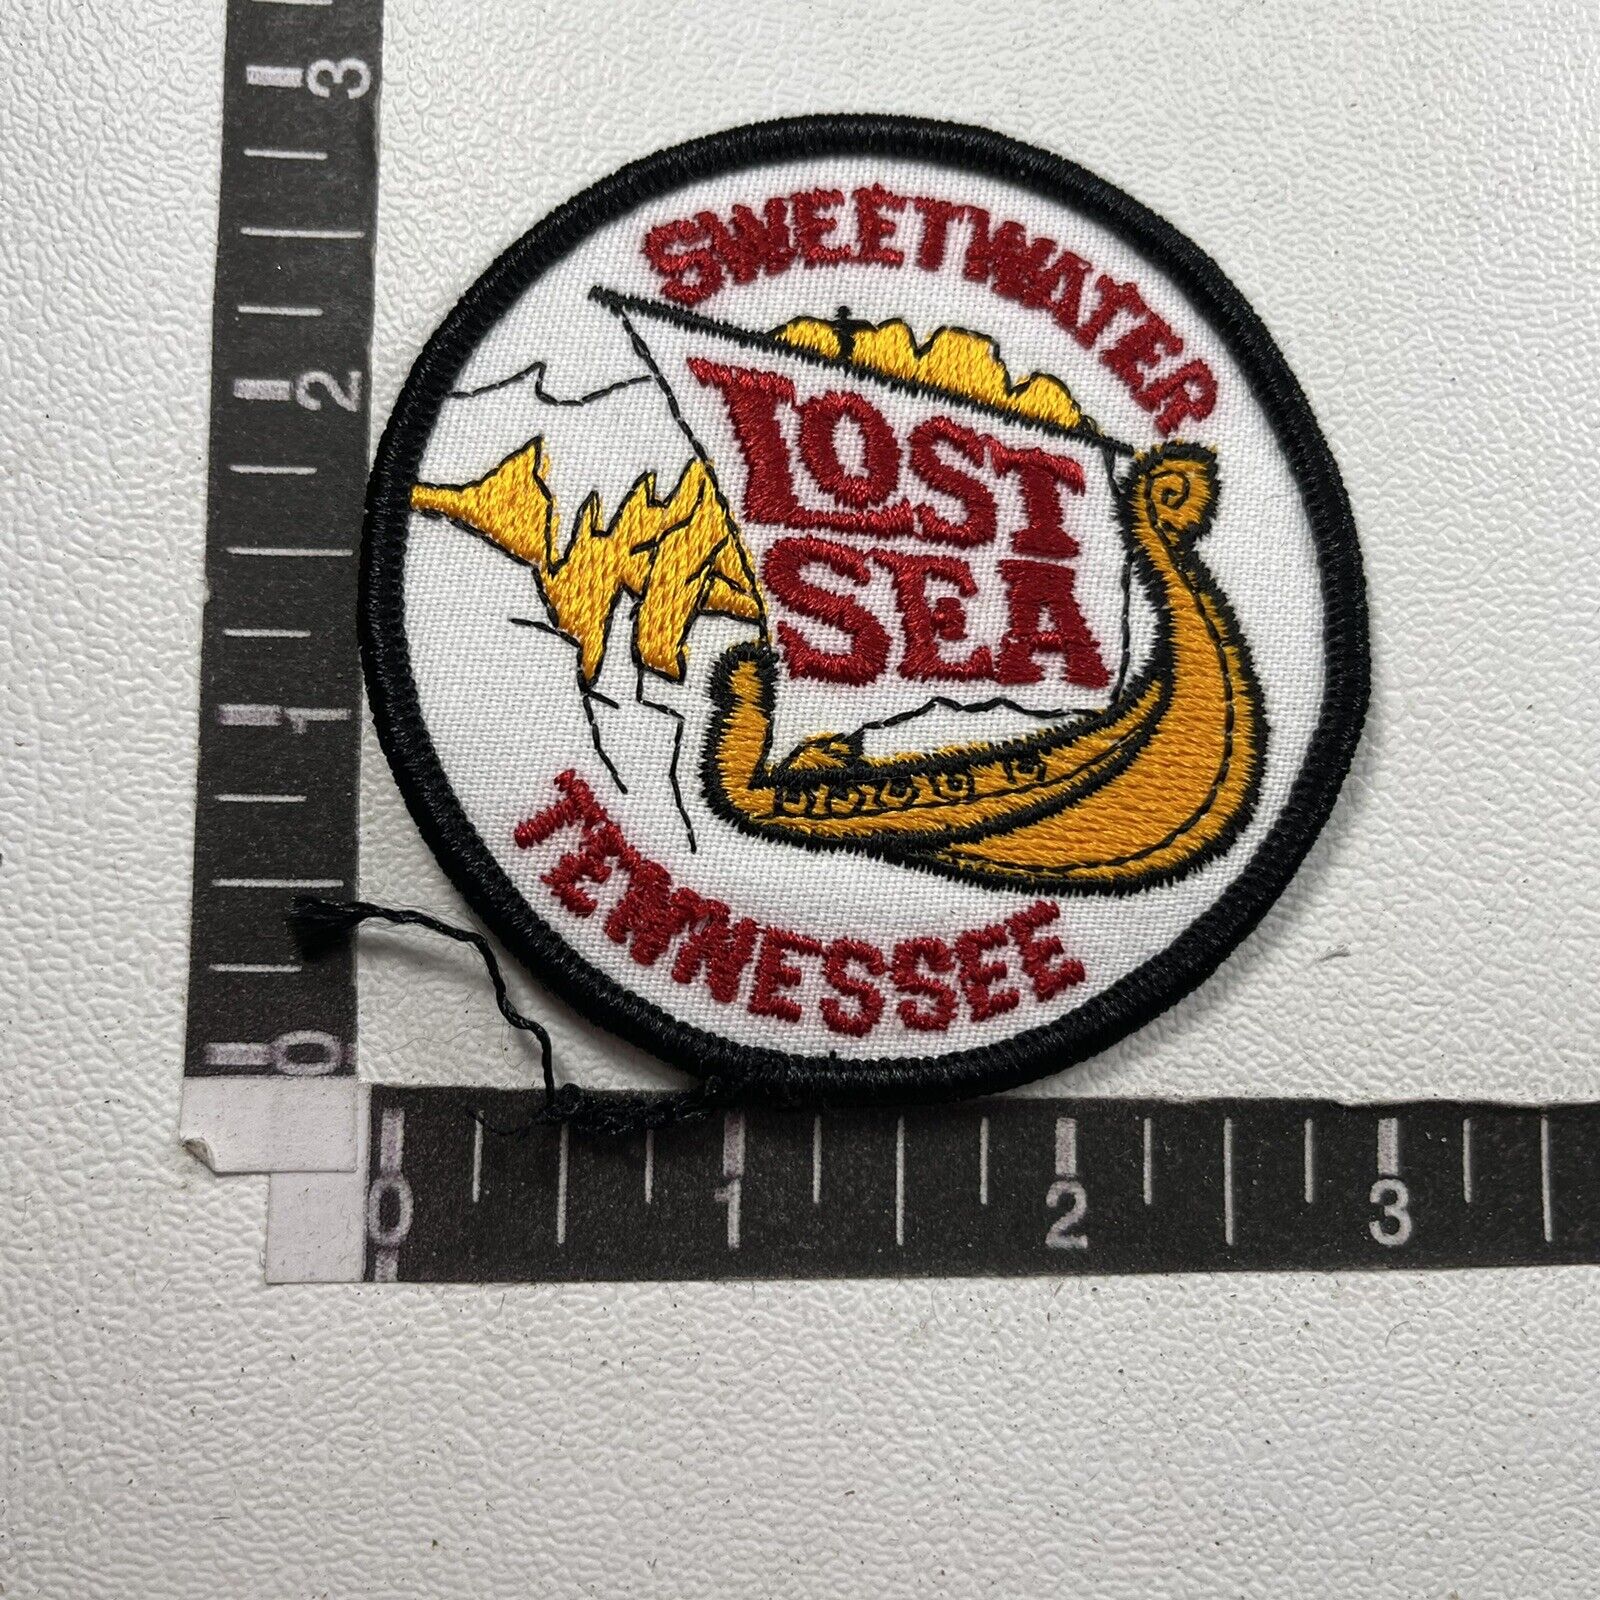 Vtg SWEETWATER TENNESSEE LOST SEA Underground Lake Advertising Patch 19TJ